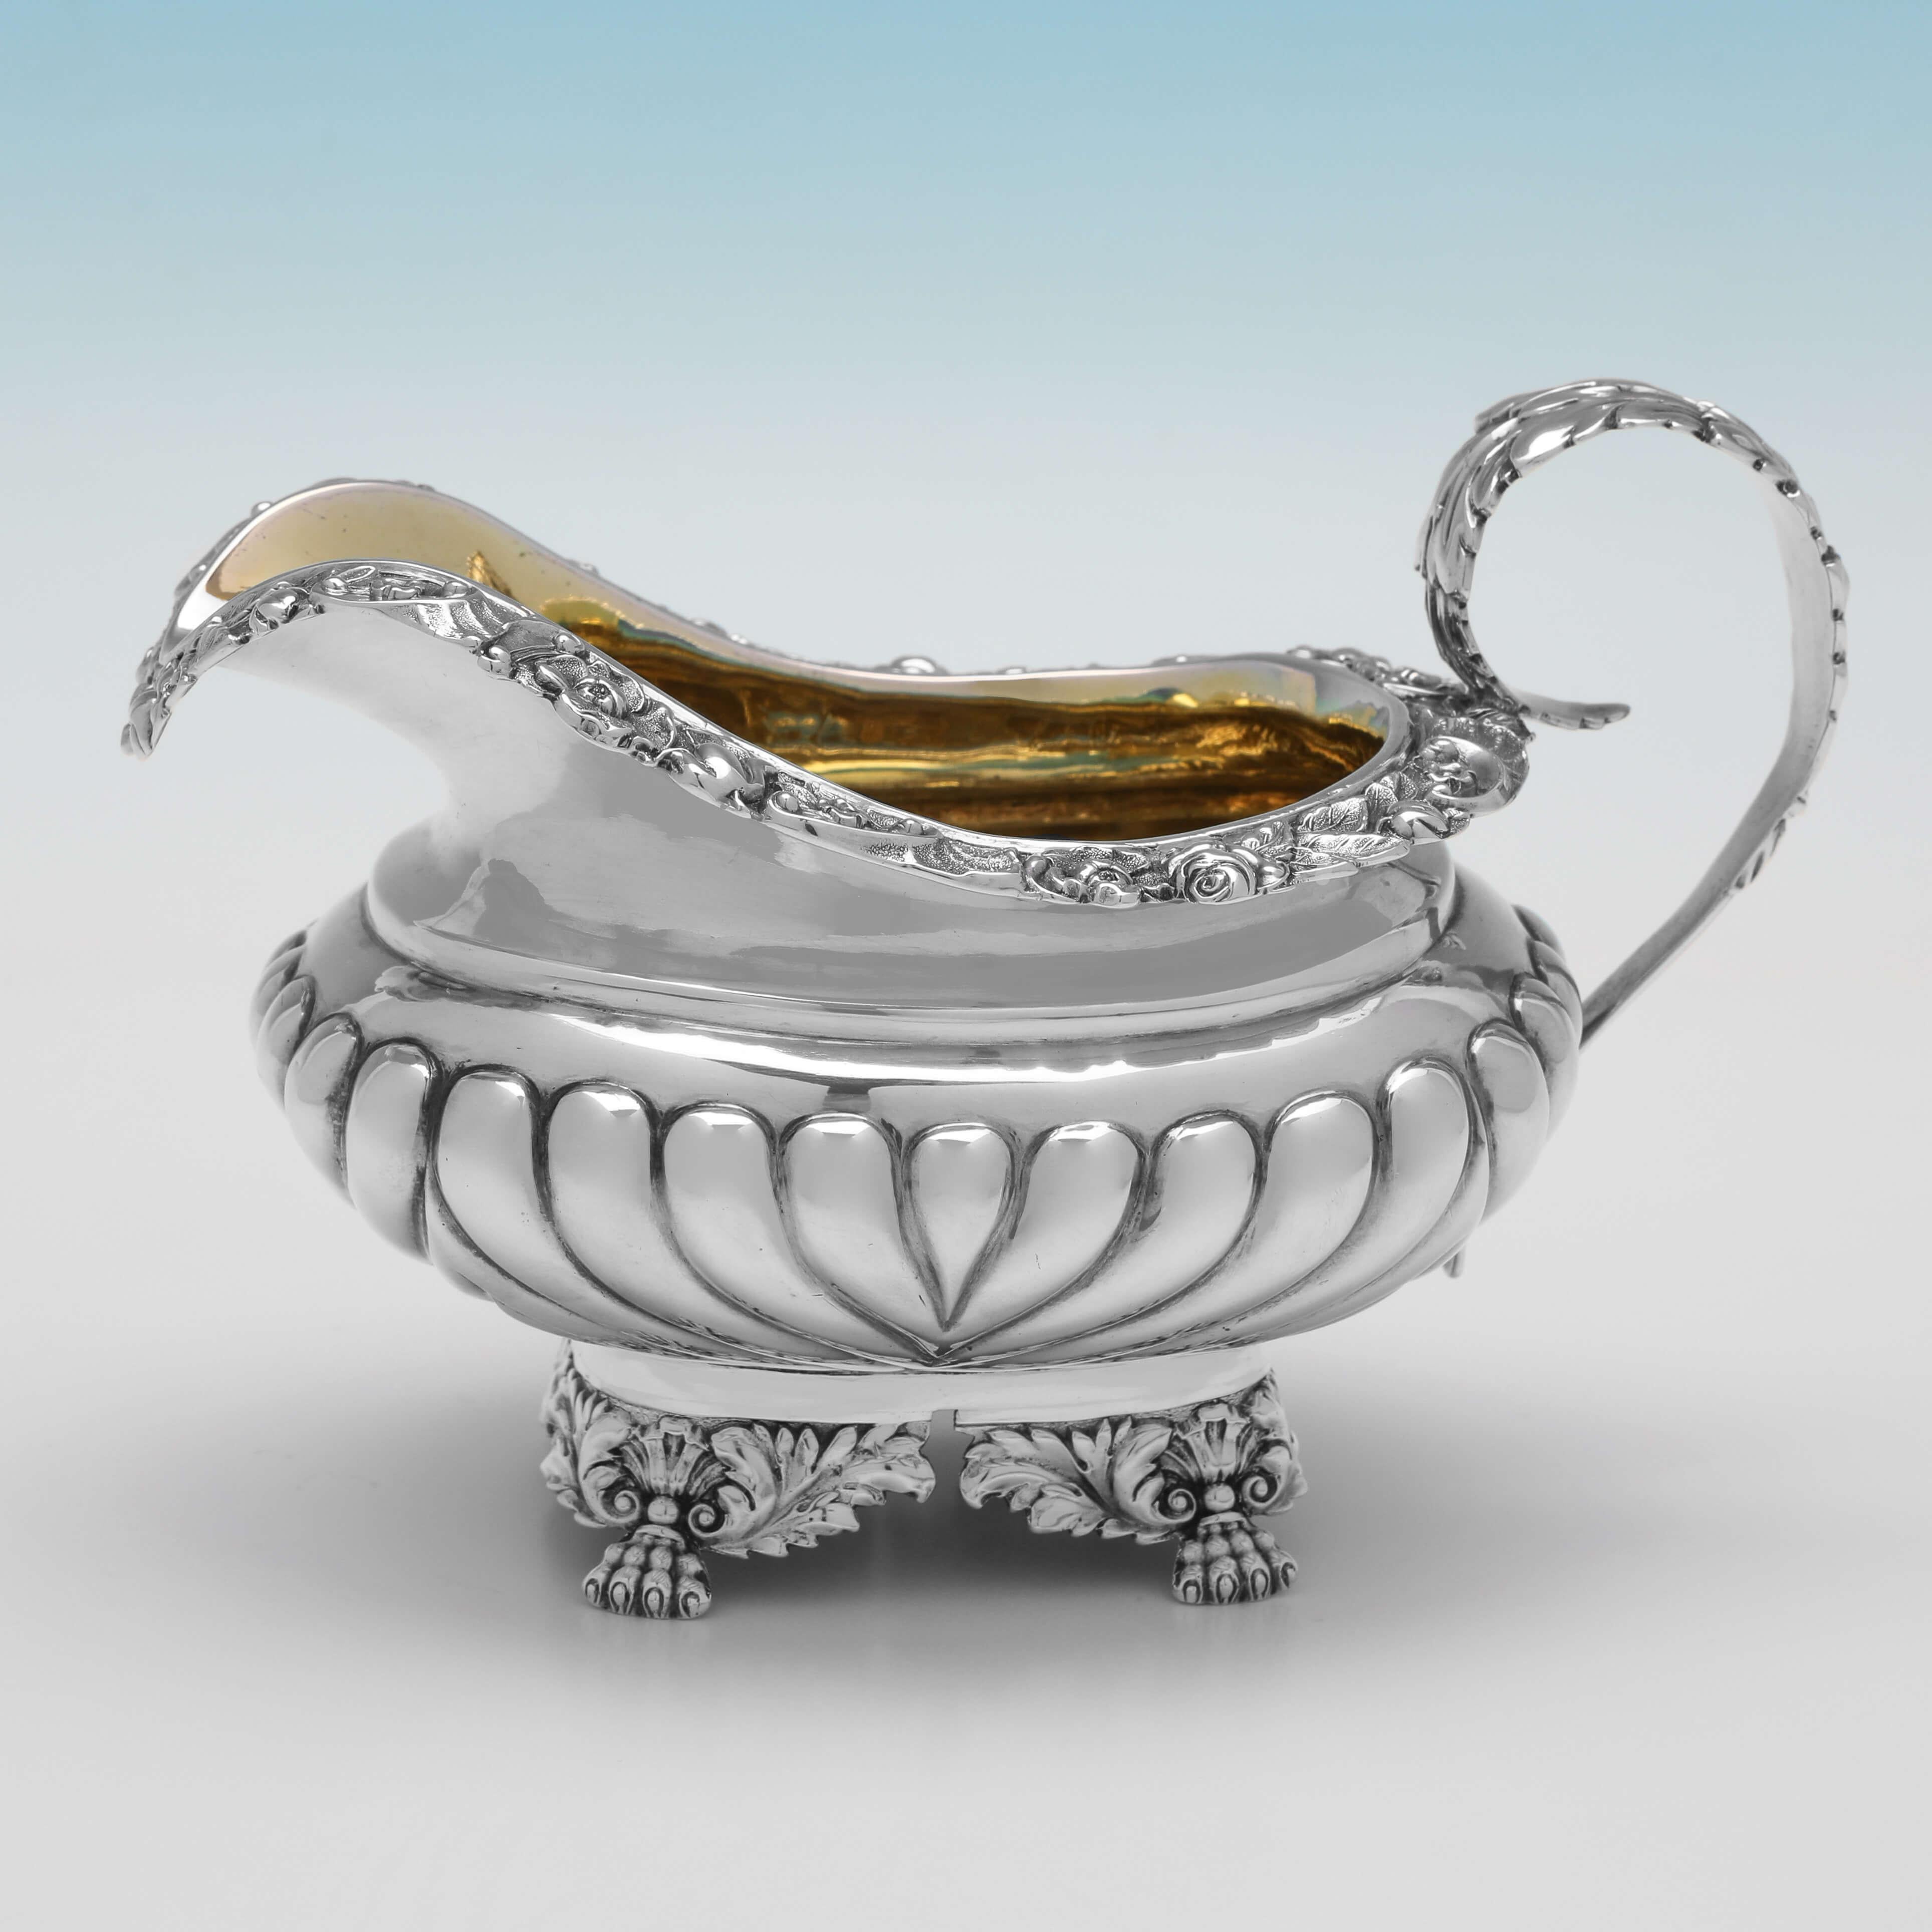 Hallmarked in London in 1828 by Charles Fox II, this delightful, George IV, Antique Sterling Silver Tea Set, features converged fluting, silver handles and gilt interiors to the sugar and cream. The teapot measures 6.25